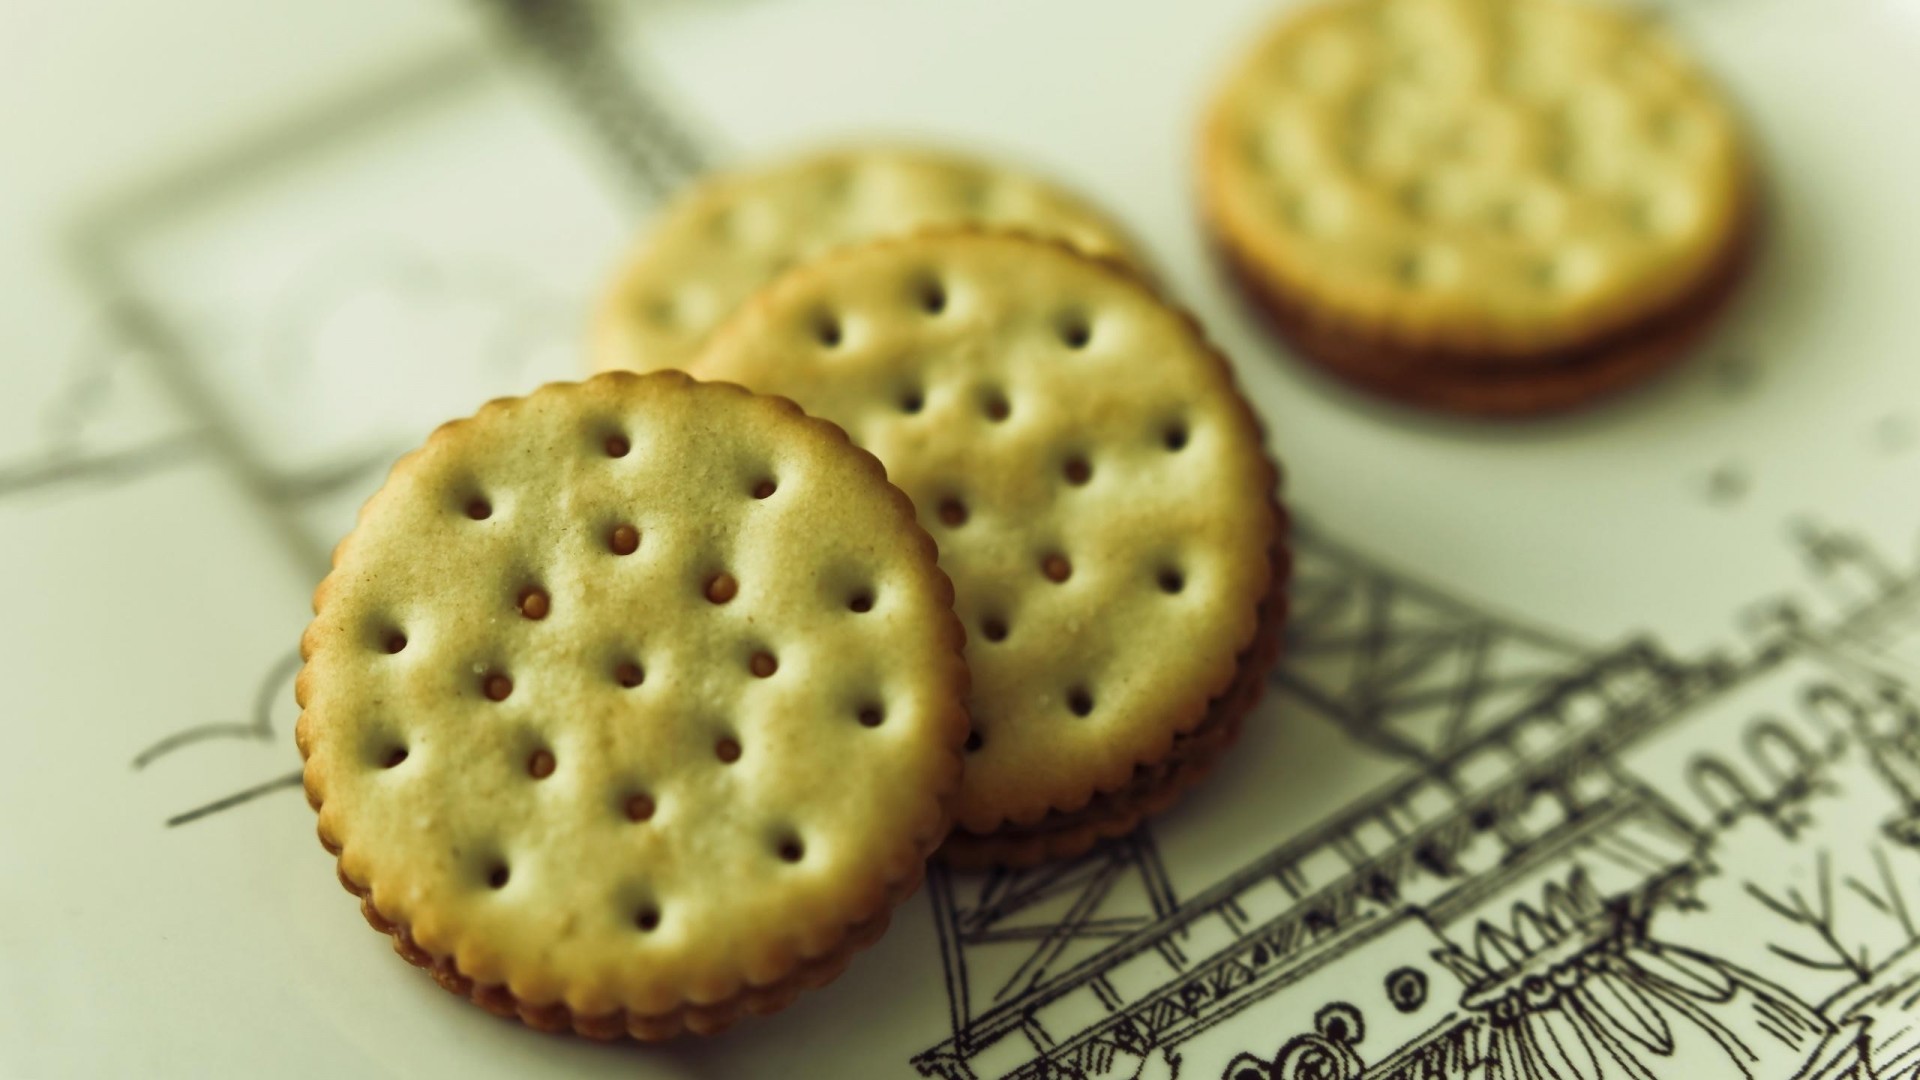 Biscuits Background Wallpaper High Definition